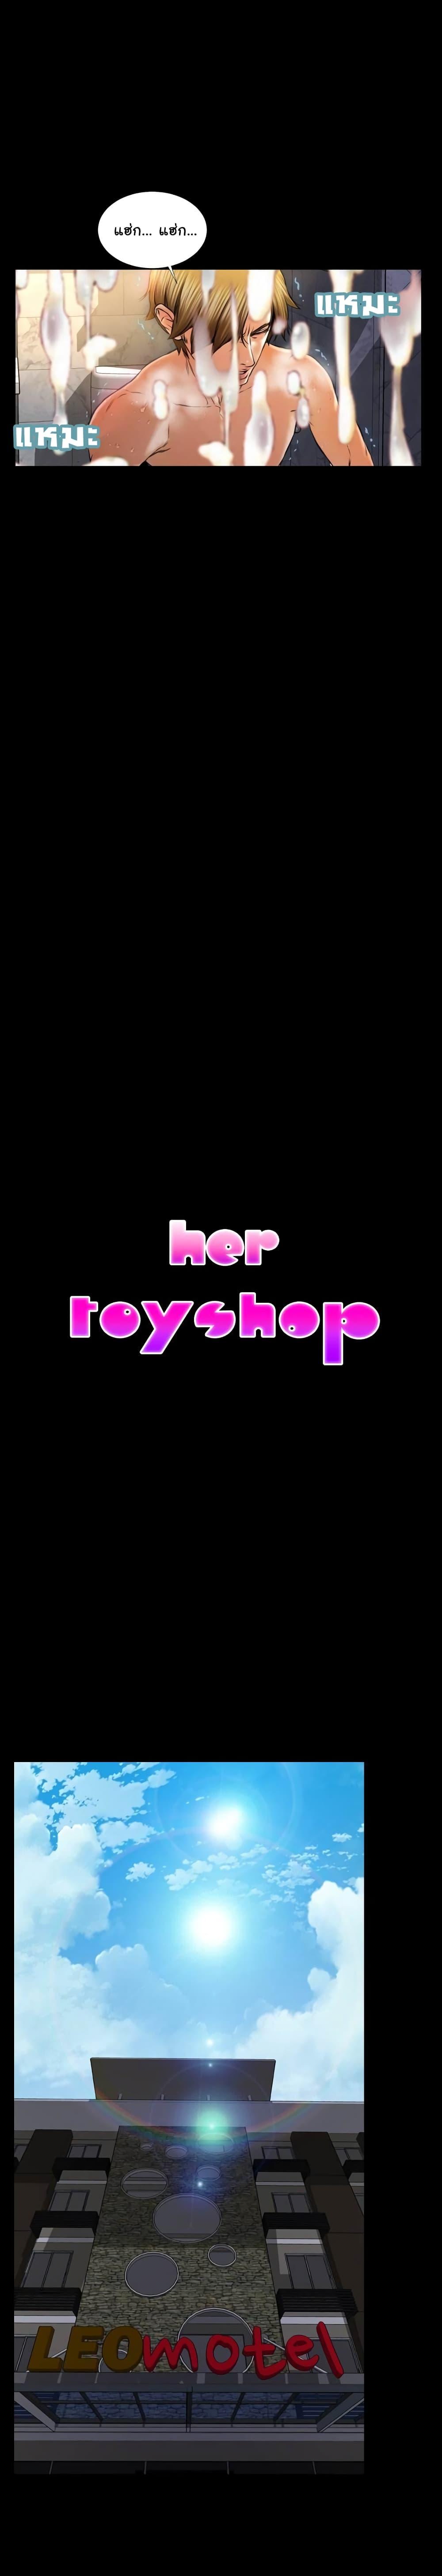 Her Toy Shop 12 03